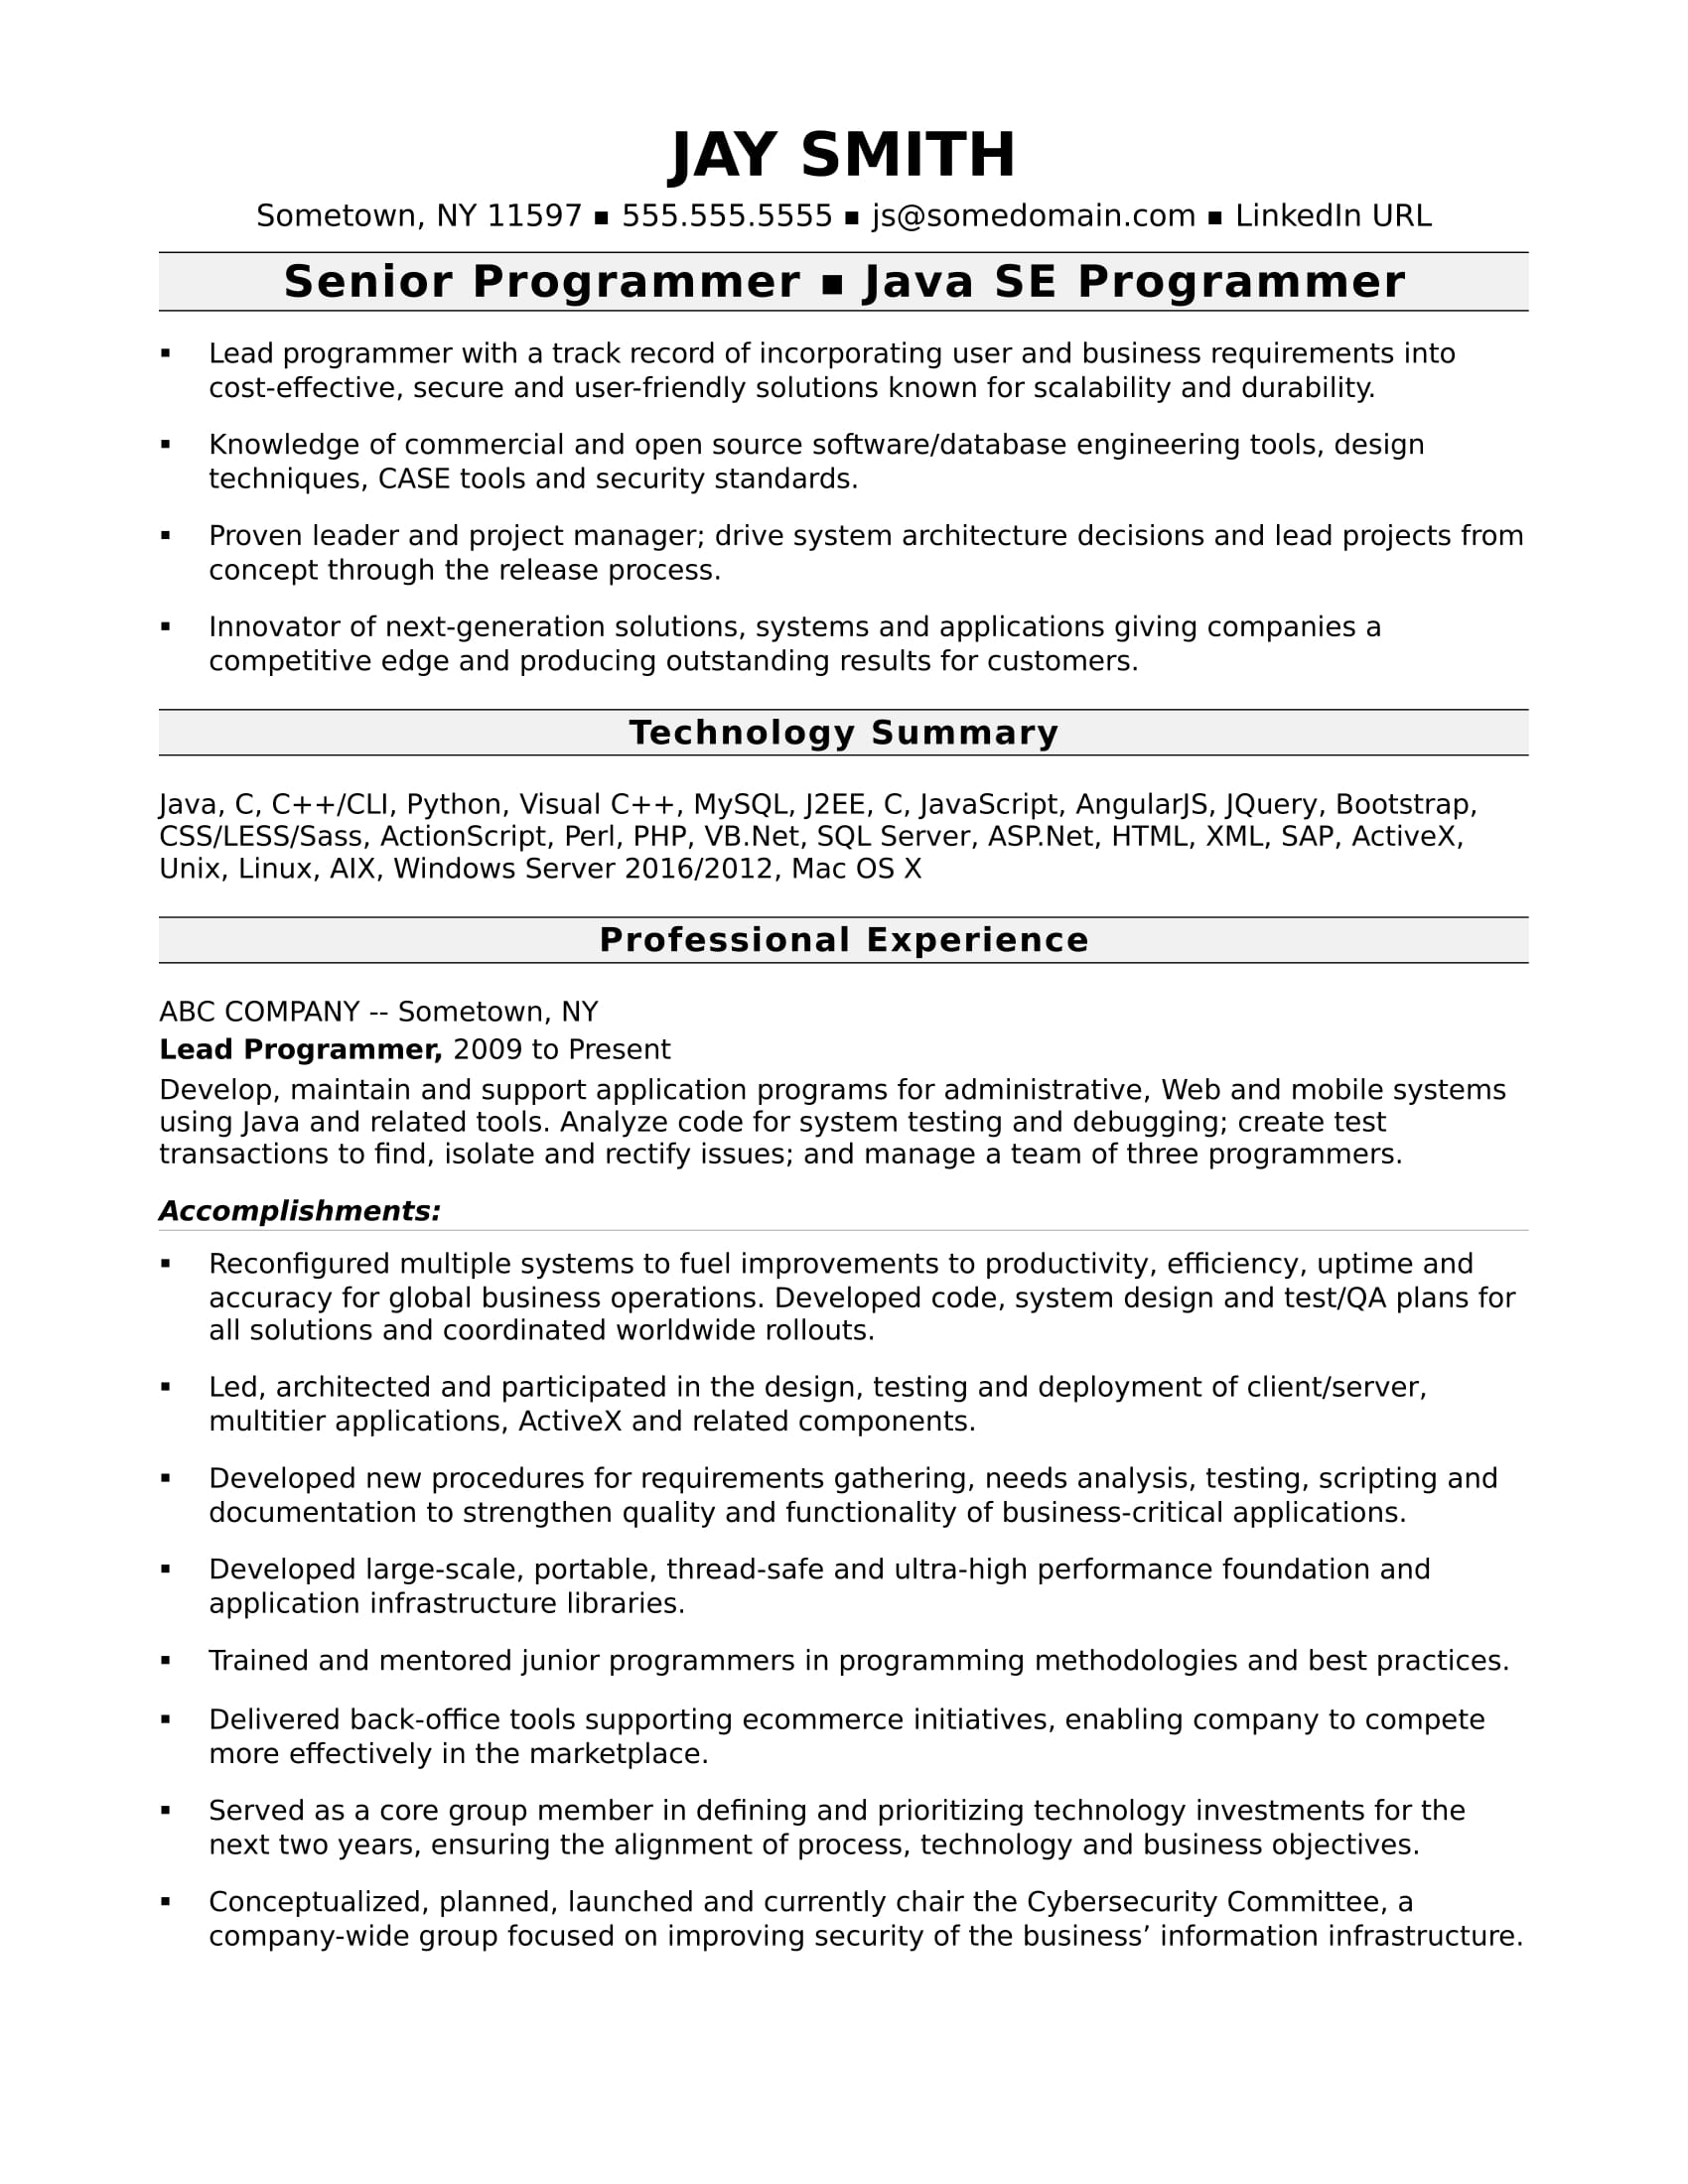 sample resume for an experienced computer programmer monster com